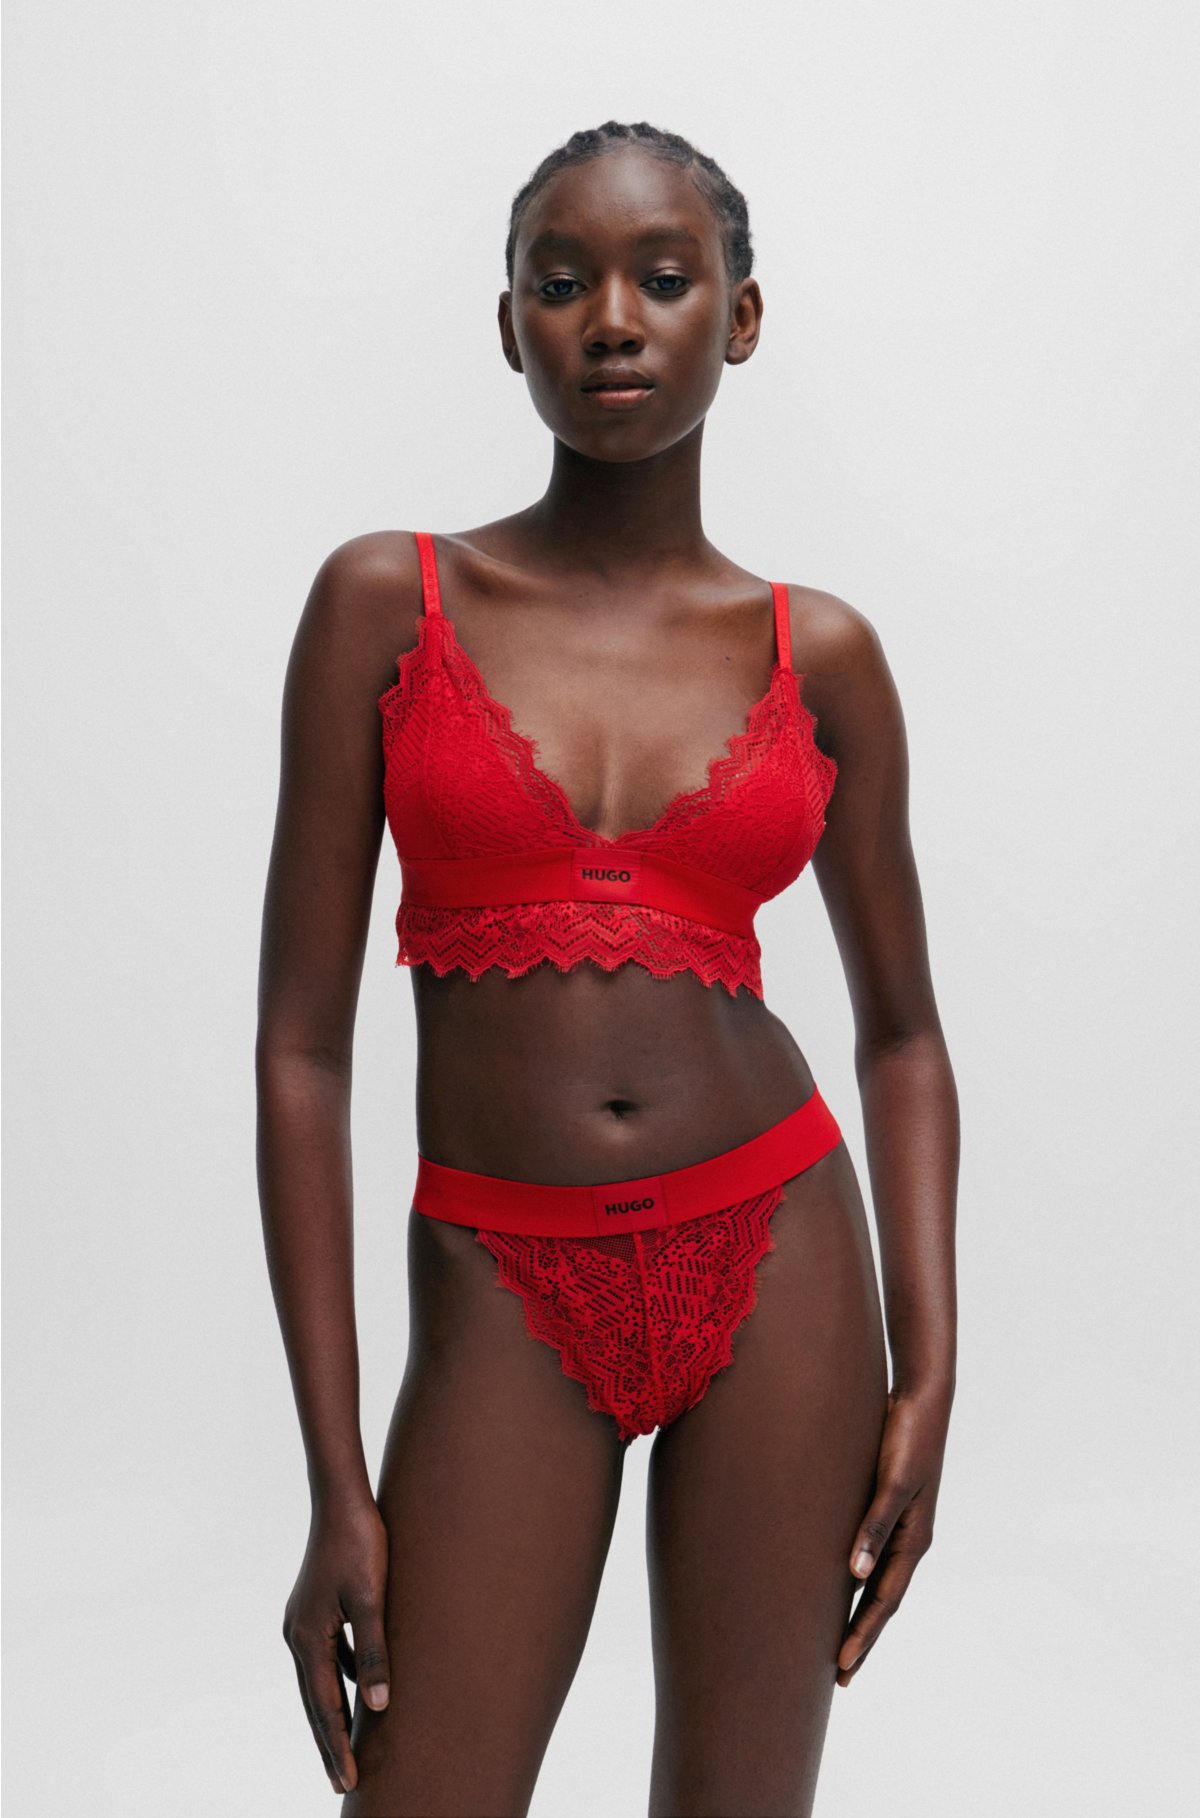 Padded in HUGO logo with lace label bra - geometric triangle